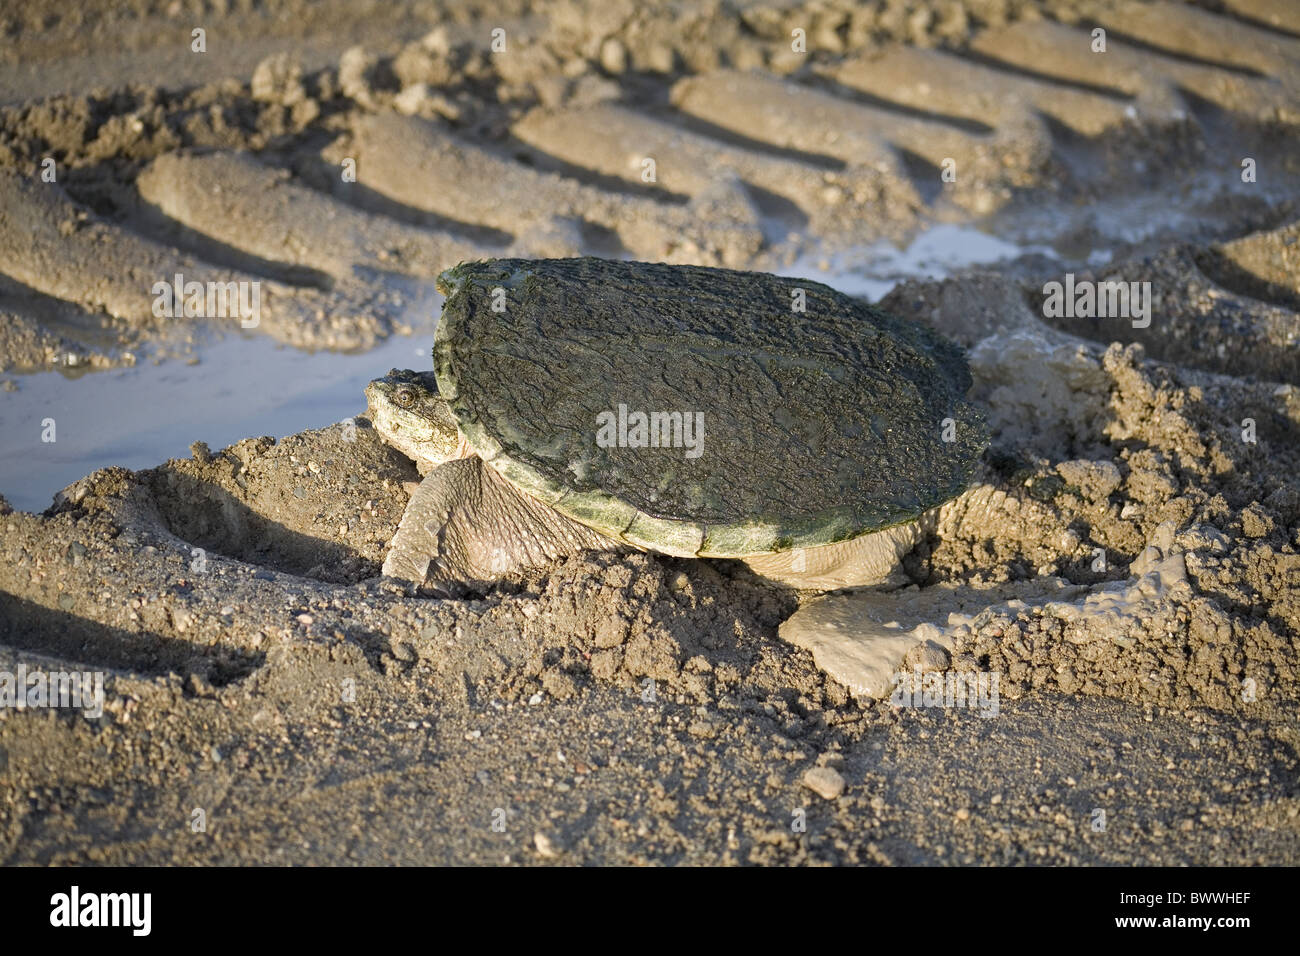 Common Snapping Turtle (Chelydra serpentina) adult female, laying eggs in nest on gravel farm track, North Dakota, U.S.A., Stock Photo